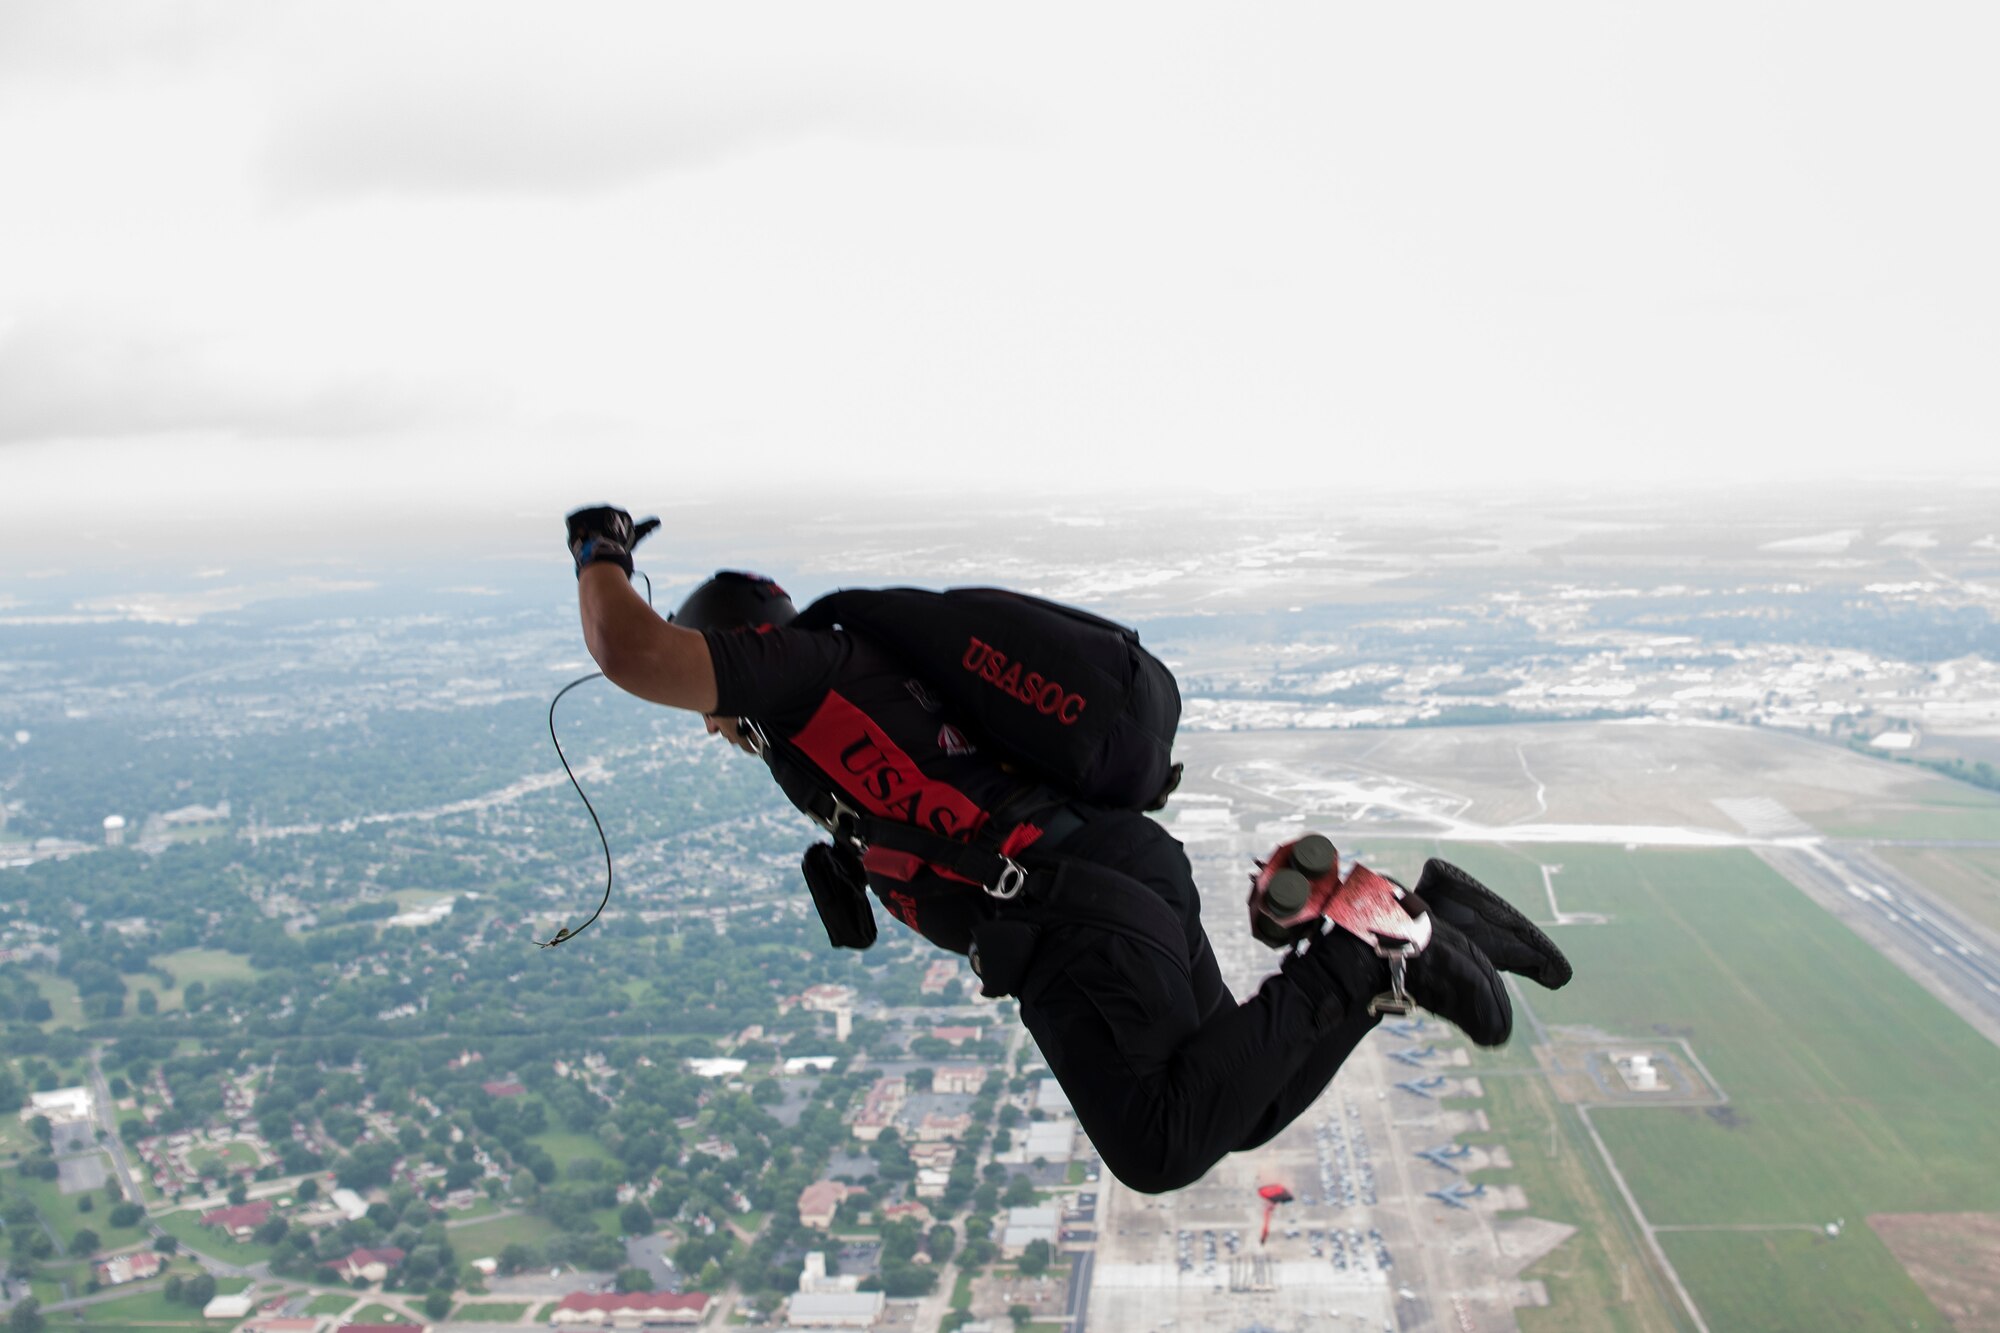 A Soldier, from the U.S. Army Special Operations Command Black Daggers Parachute Demonstration Team jumps from an aircraft during the Defenders of Liberty Air & Space Show at Barksdale Air Force Base, La., May 18, 2019. The team’s mission is to perform live aerial demonstrations in support of Army Special Operations community relations and recruiting. (U.S. Air Force photo by Airman 1st Class Katelin Britton)